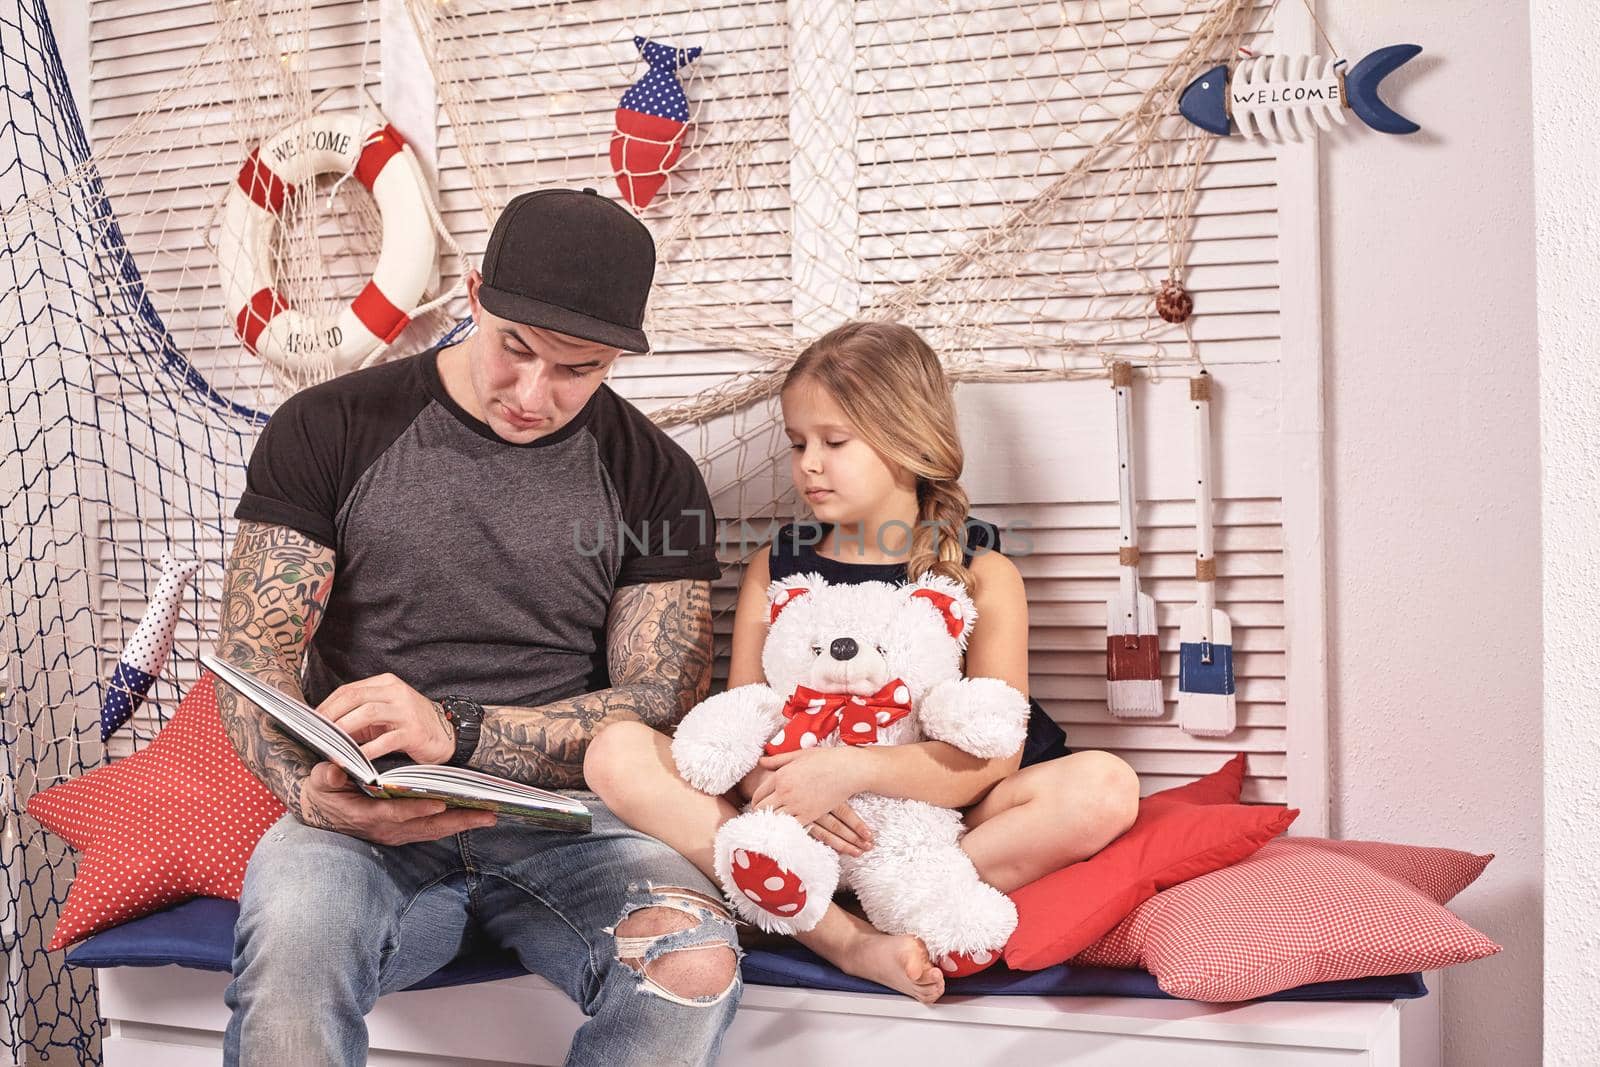 Young tattoed man in a cap is spending time with his little cute daughter. They are sitting on a white bench with some red pillows, in a room decorated in a marine style. She is holding a toy bear. Reading fairytales while daughter is sitting nearby. Happy family.